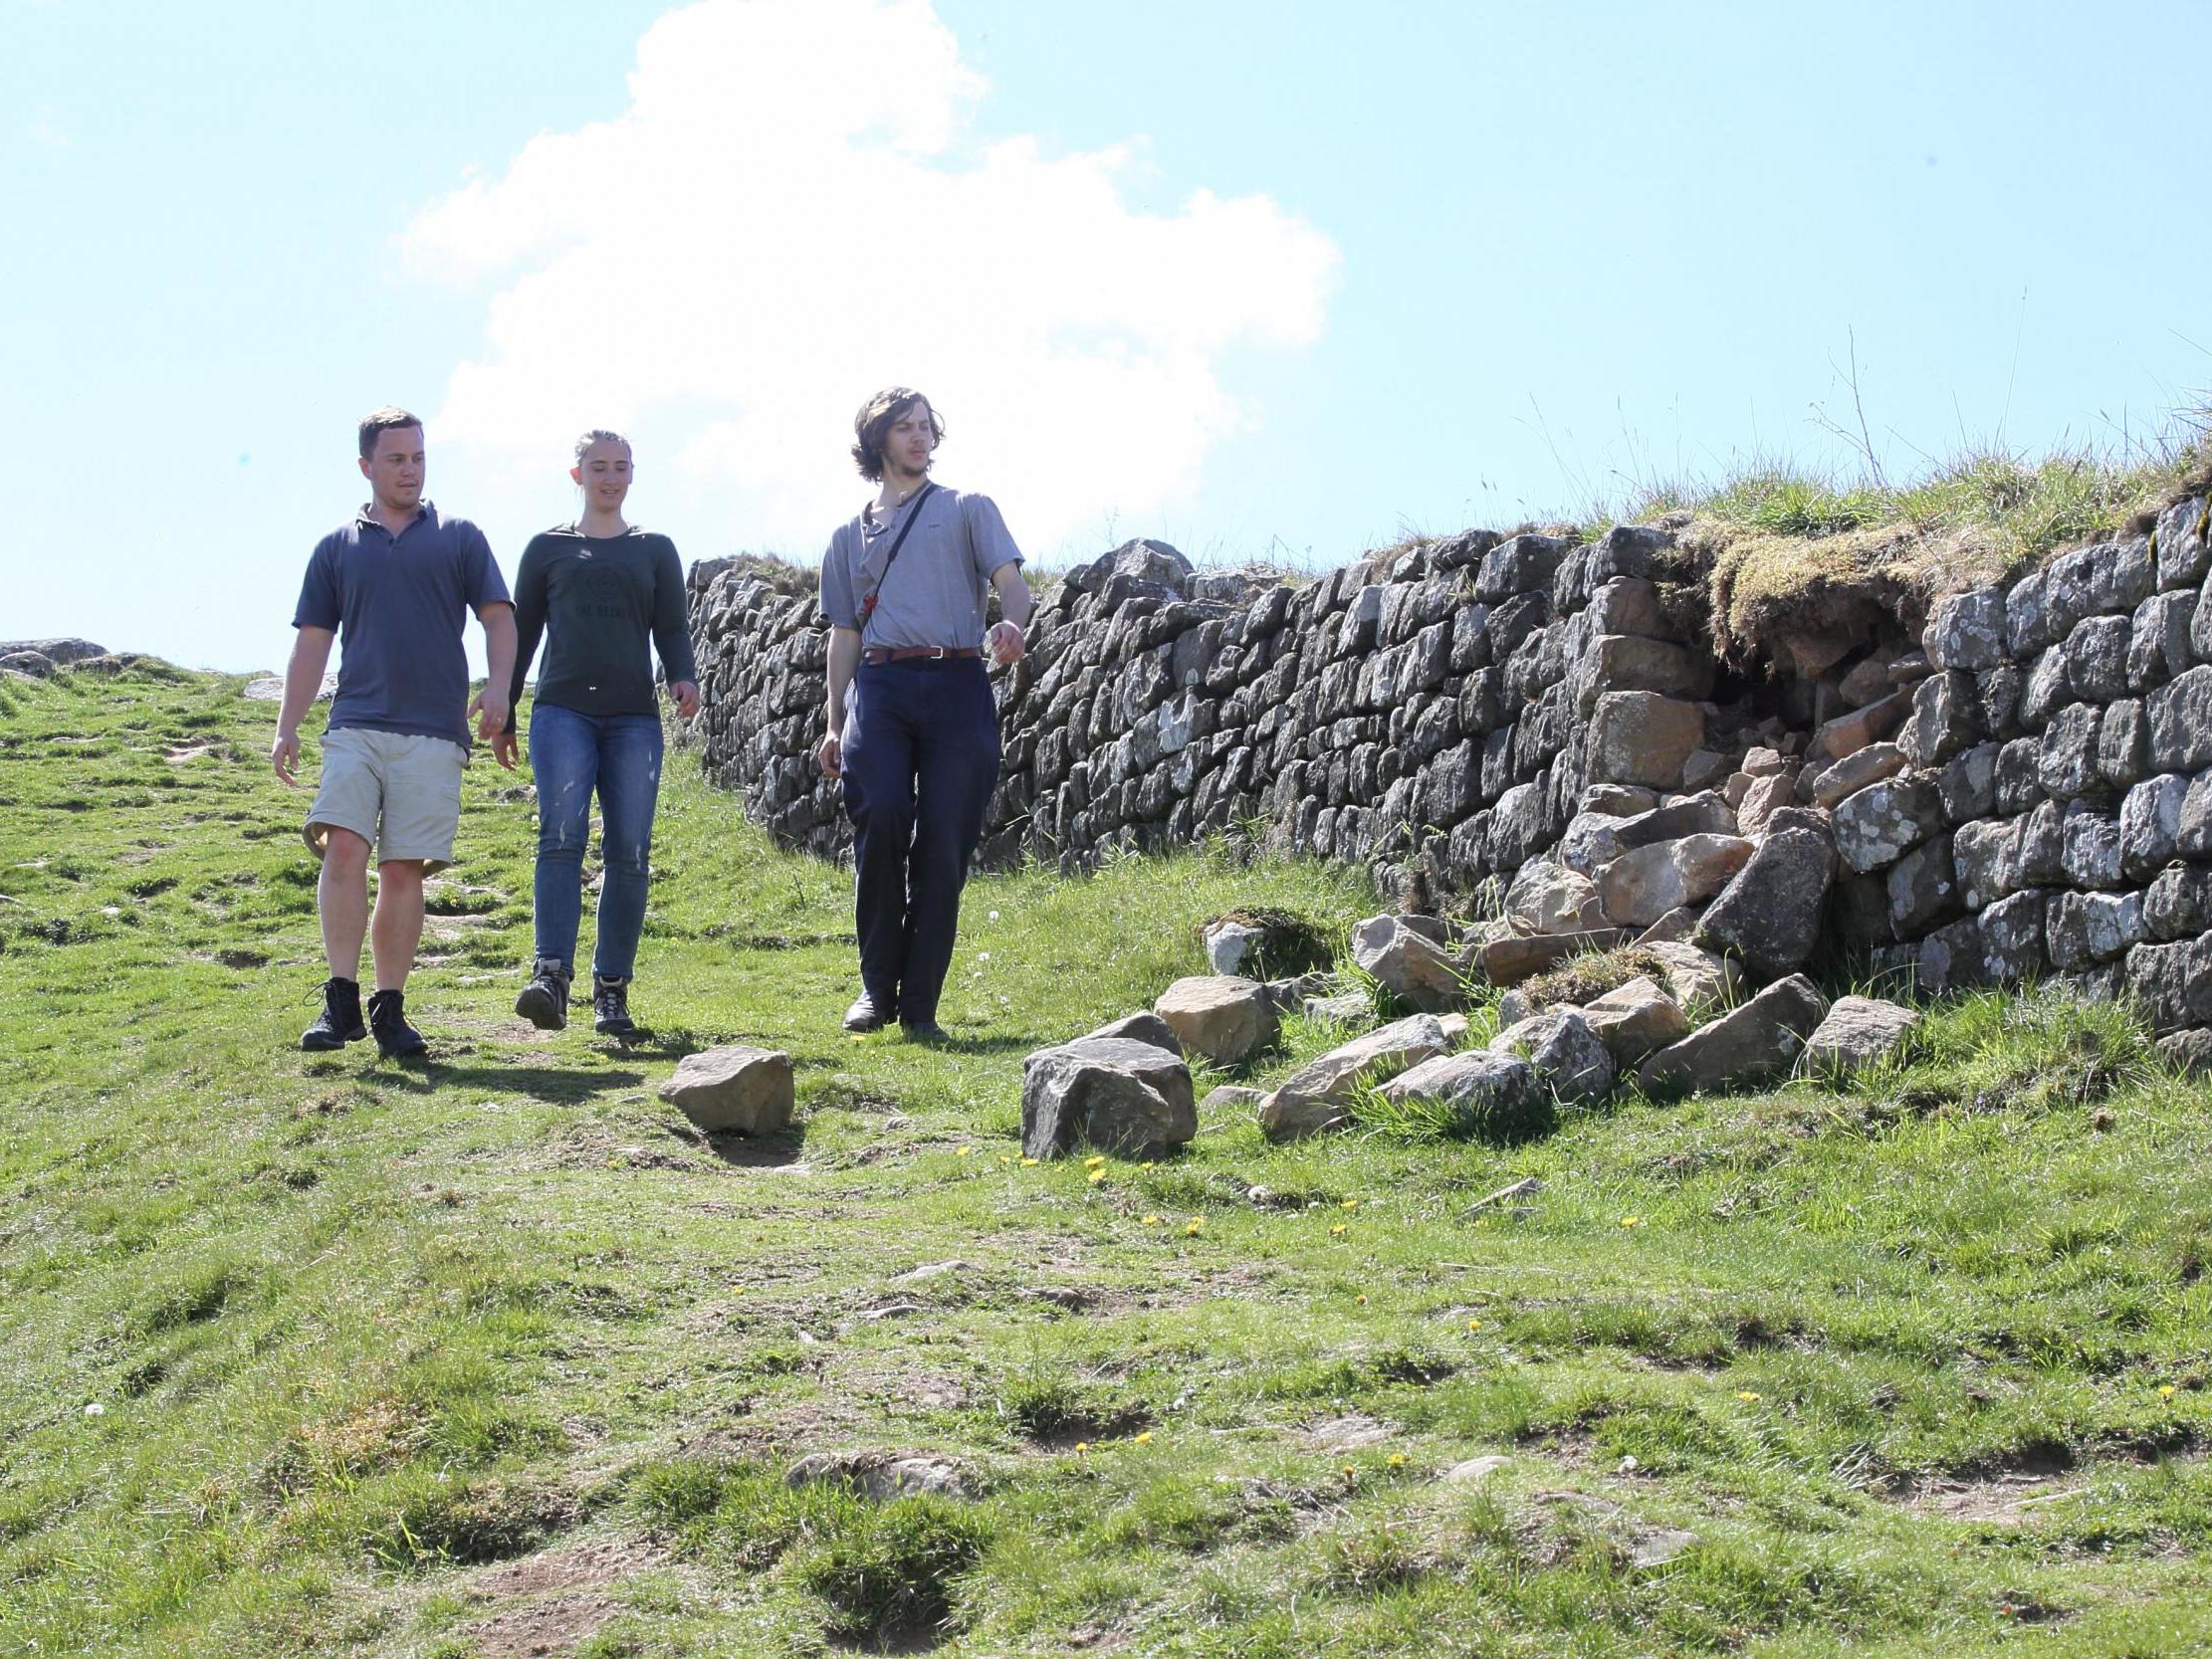 Police are to patrol Hadrian's Wall to protect it from being damaged by rogue "nighthawk" metal detectorists.